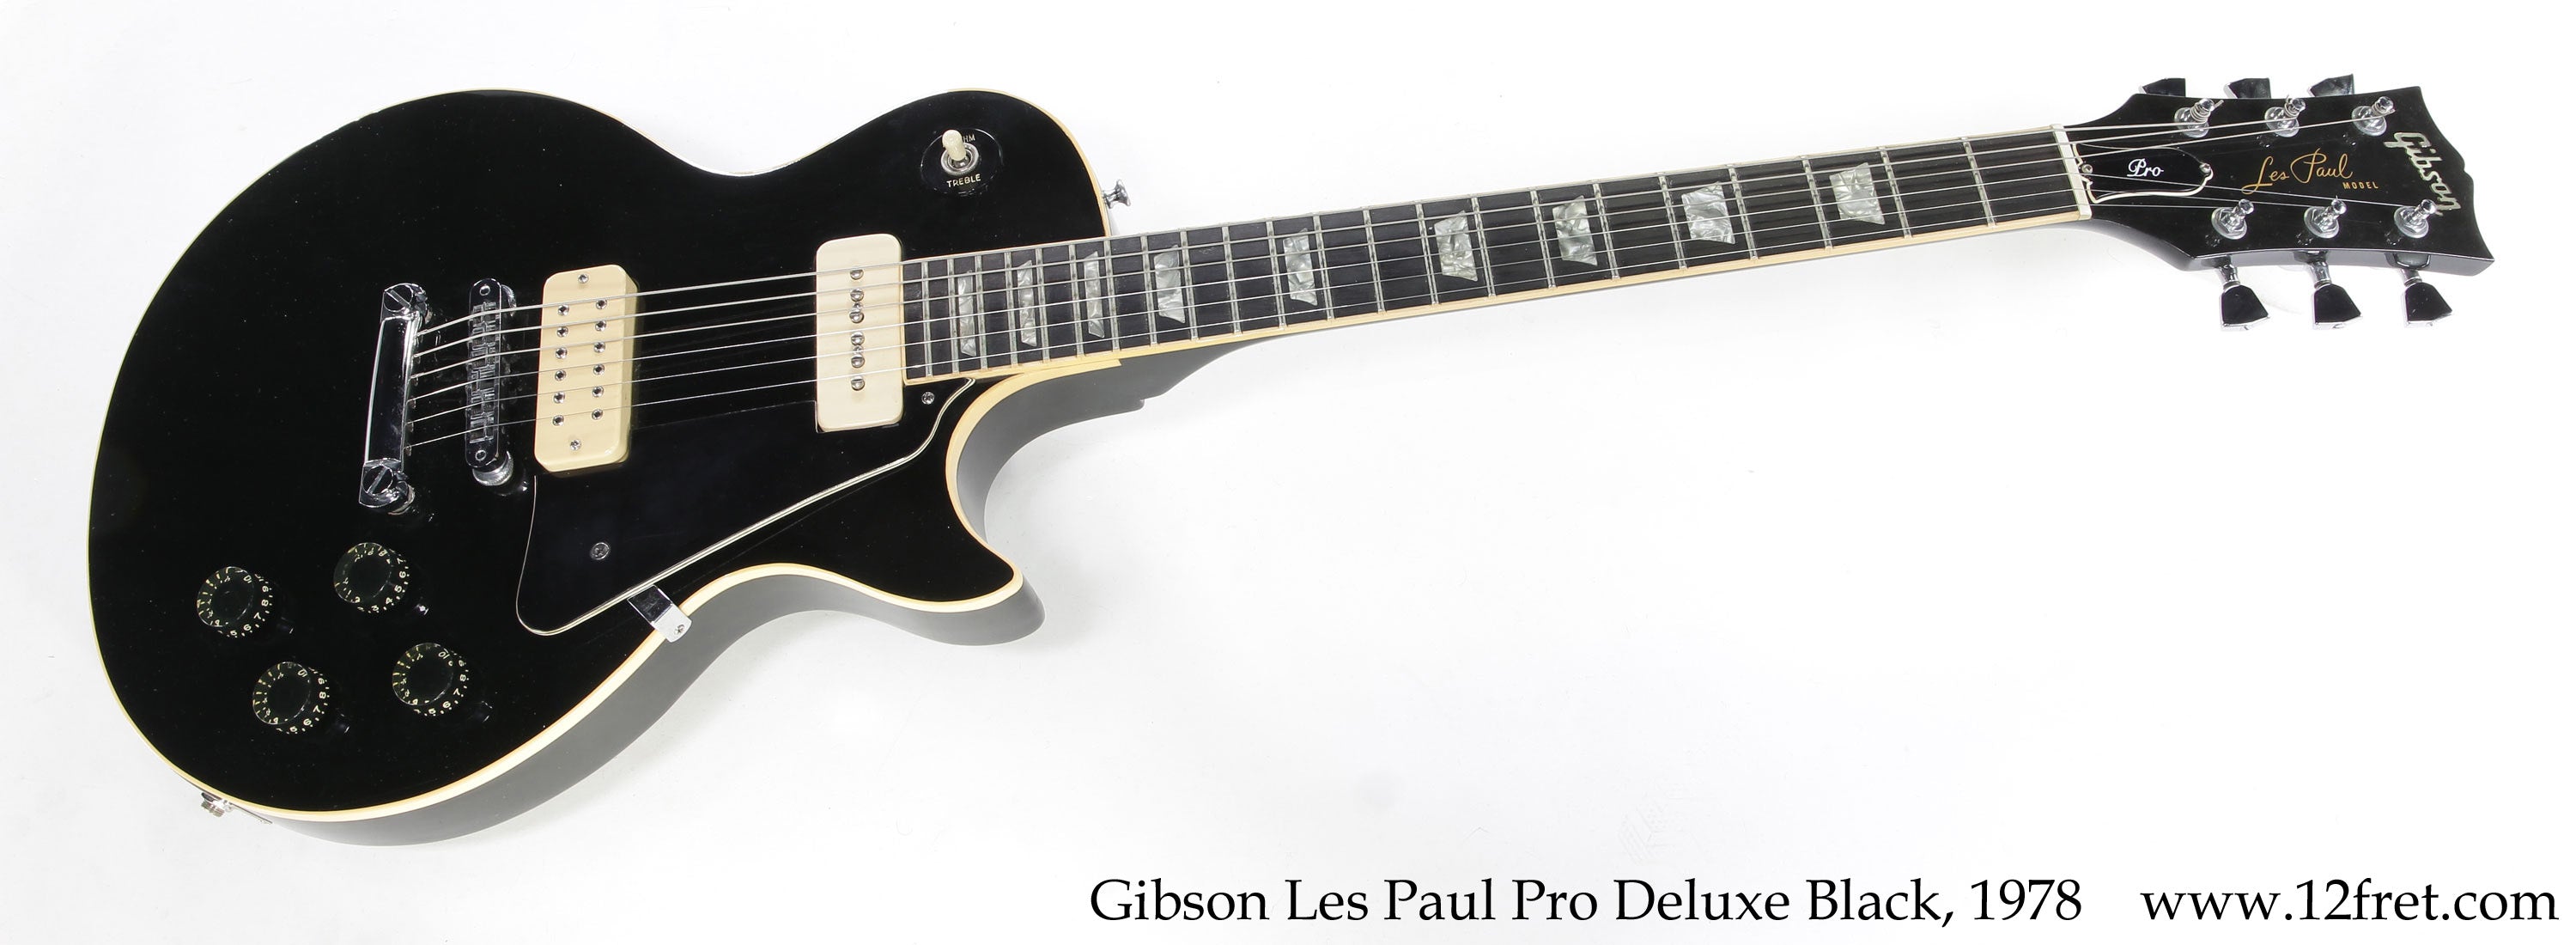 Gibson Les Paul Pro Deluxe Black, 1978 - The Twelfth Fret